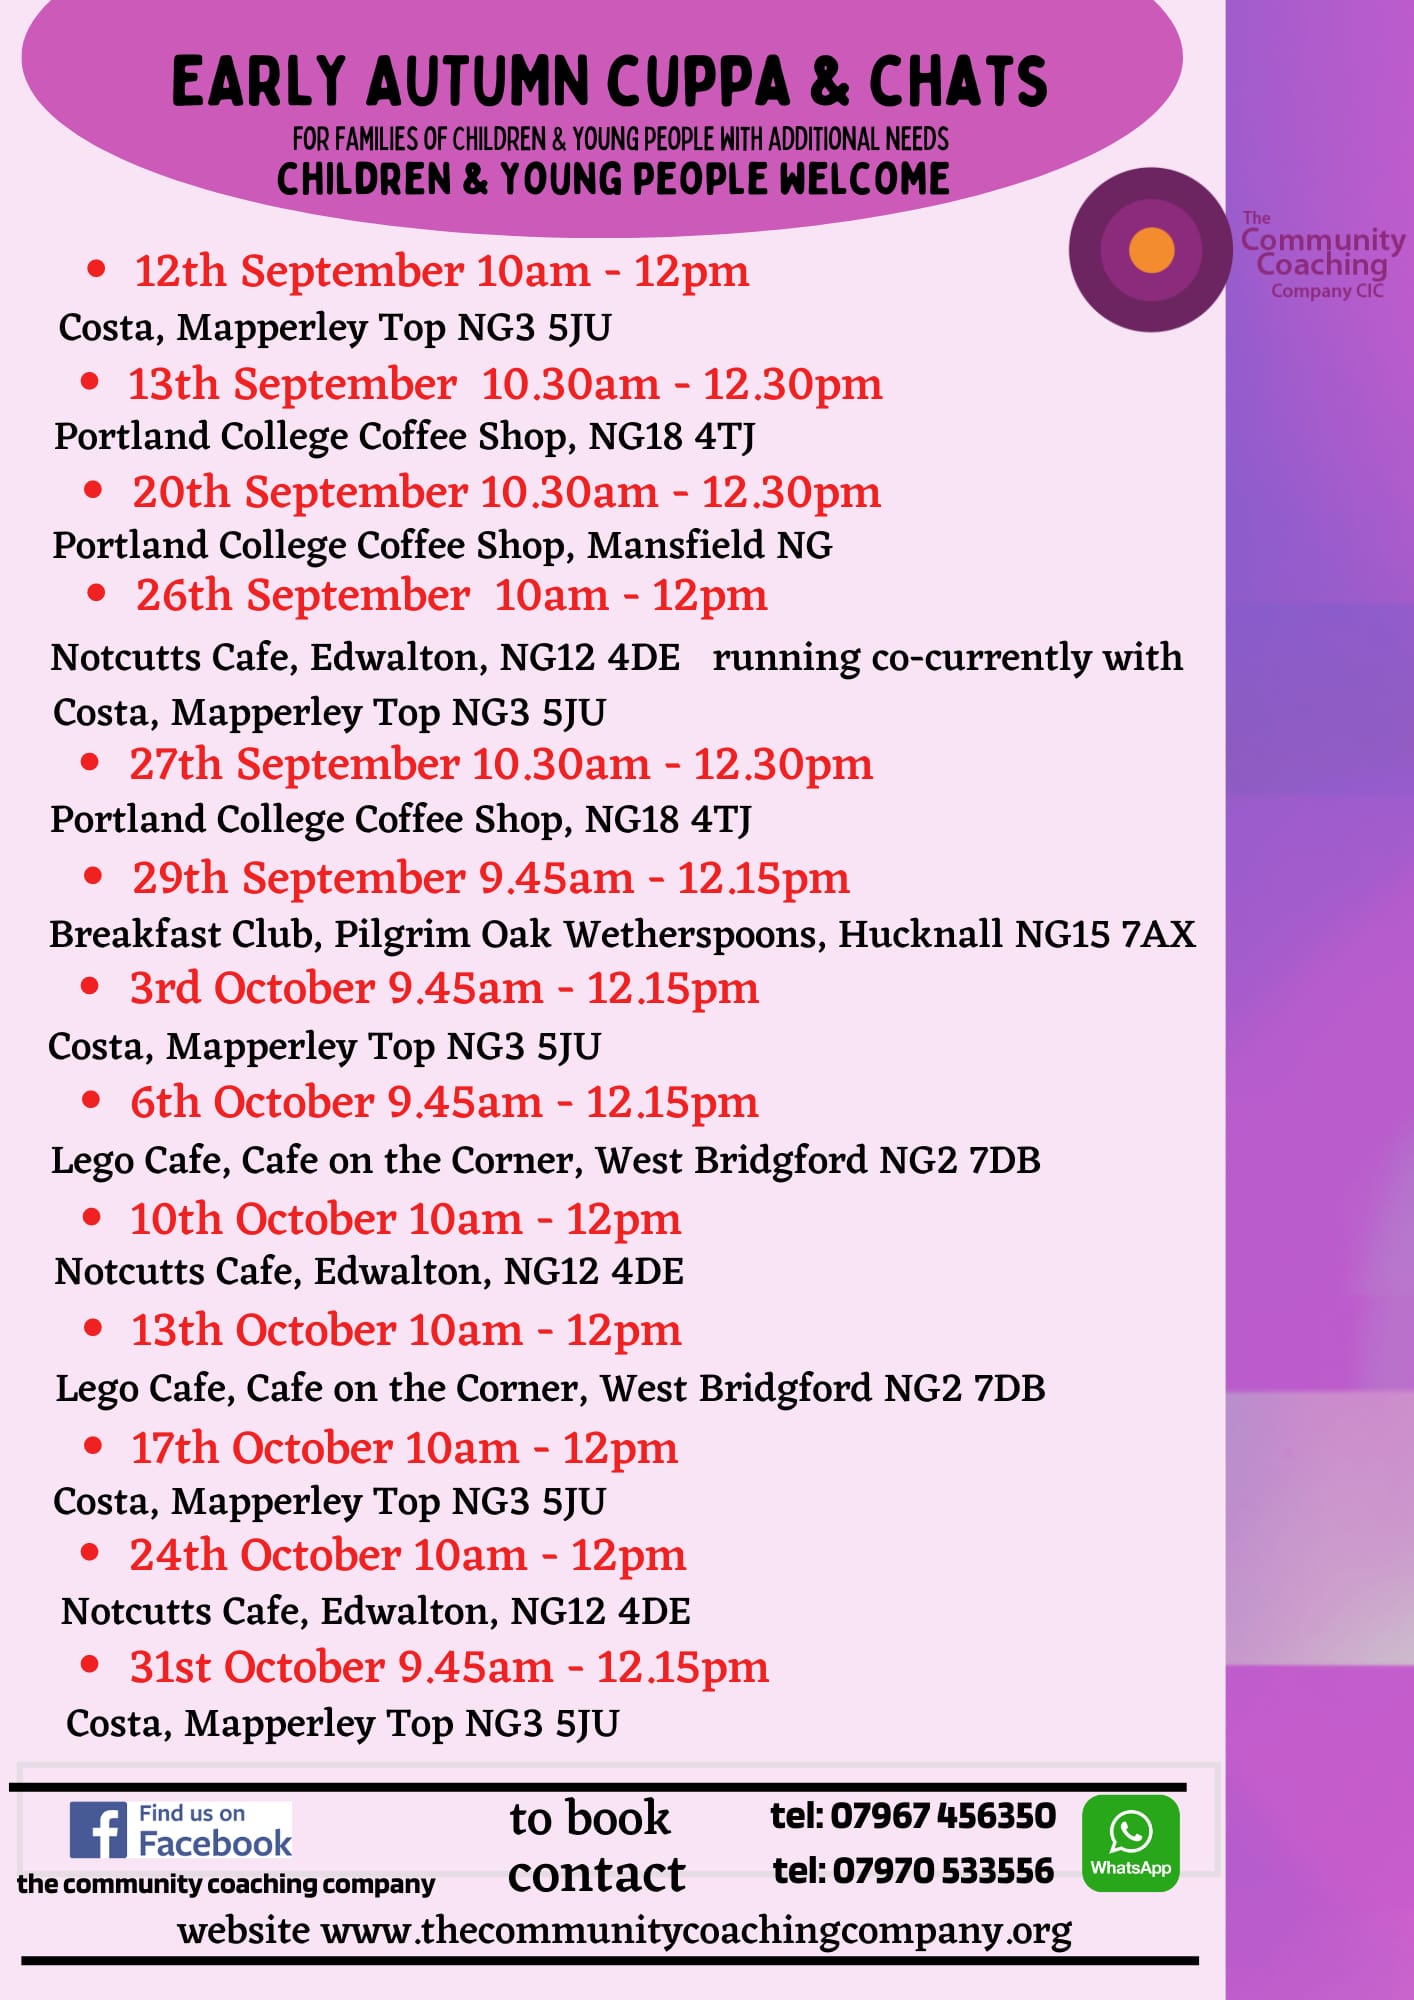 Cuppa & Chat Events Flyer Sept oct.jpeg (322 KB)